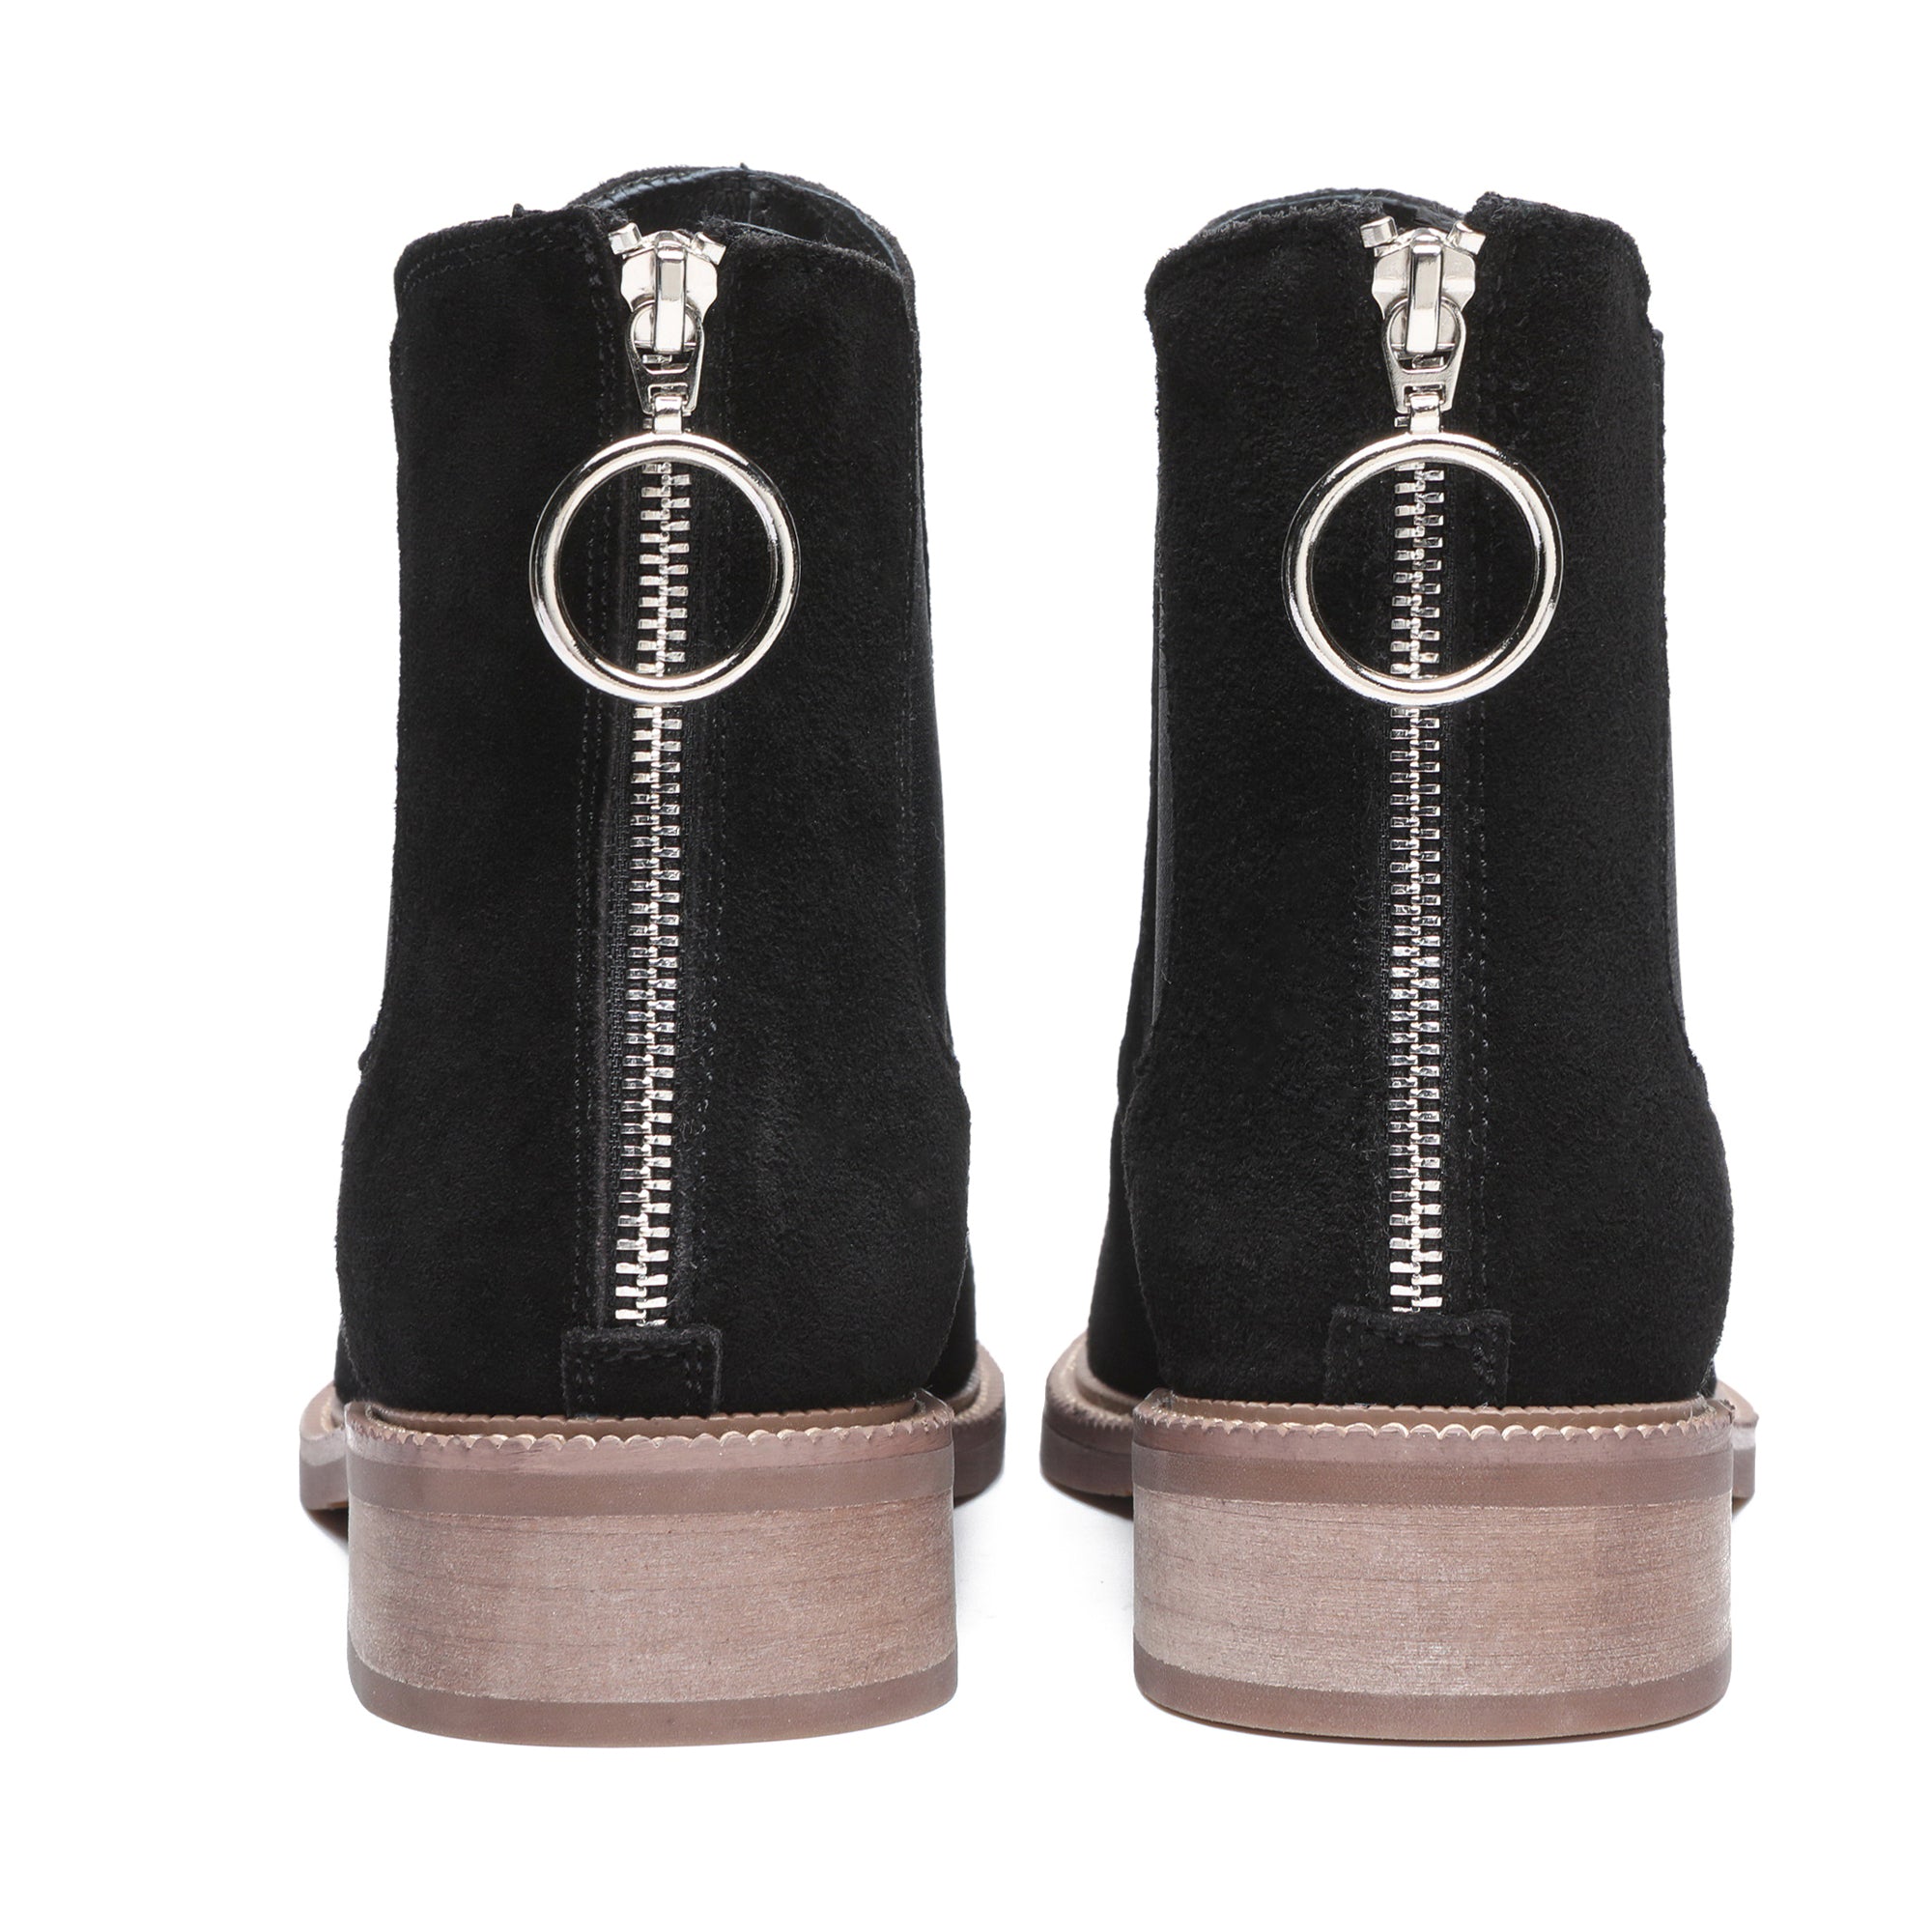 Luxe Black Ankle Zipper Boots